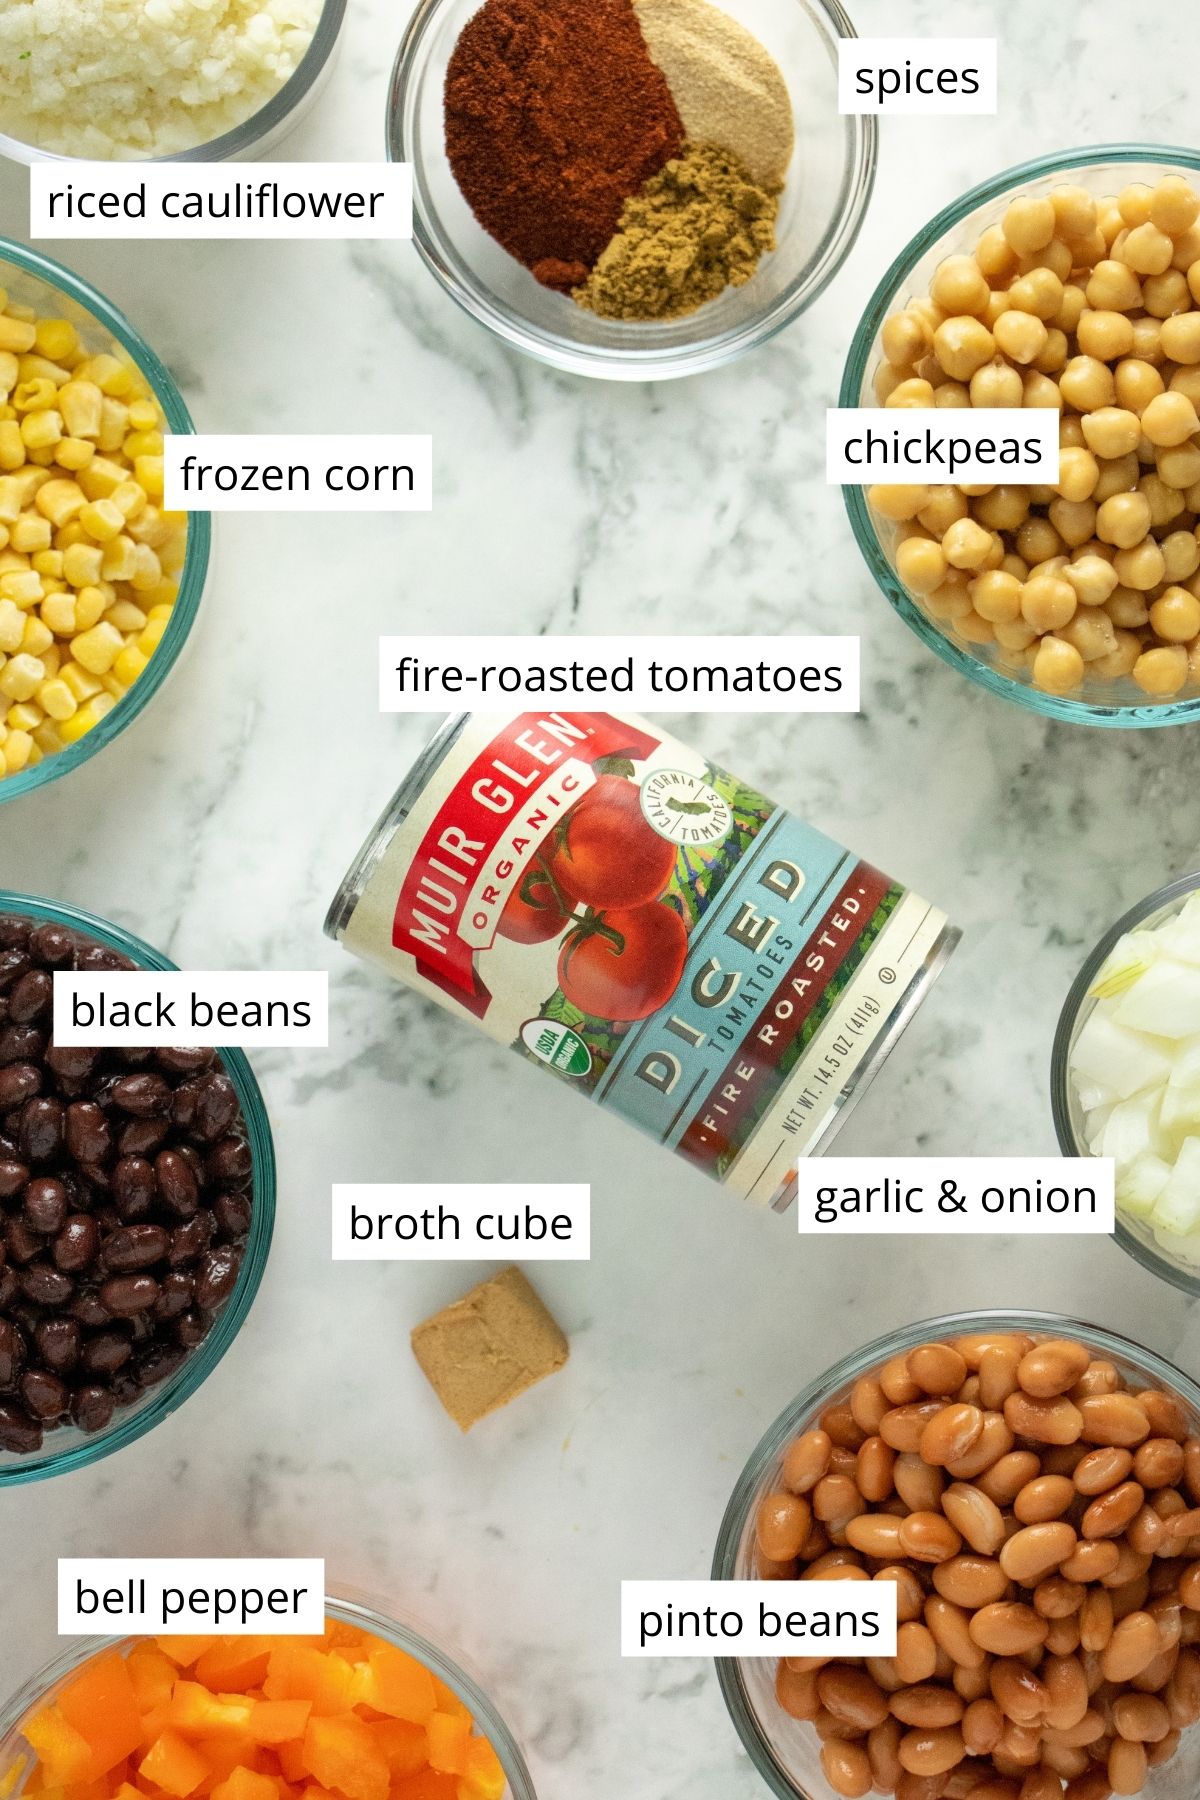 canned tomatoes, beans, and other chili ingredients on a marble table with text labels for each ingredient